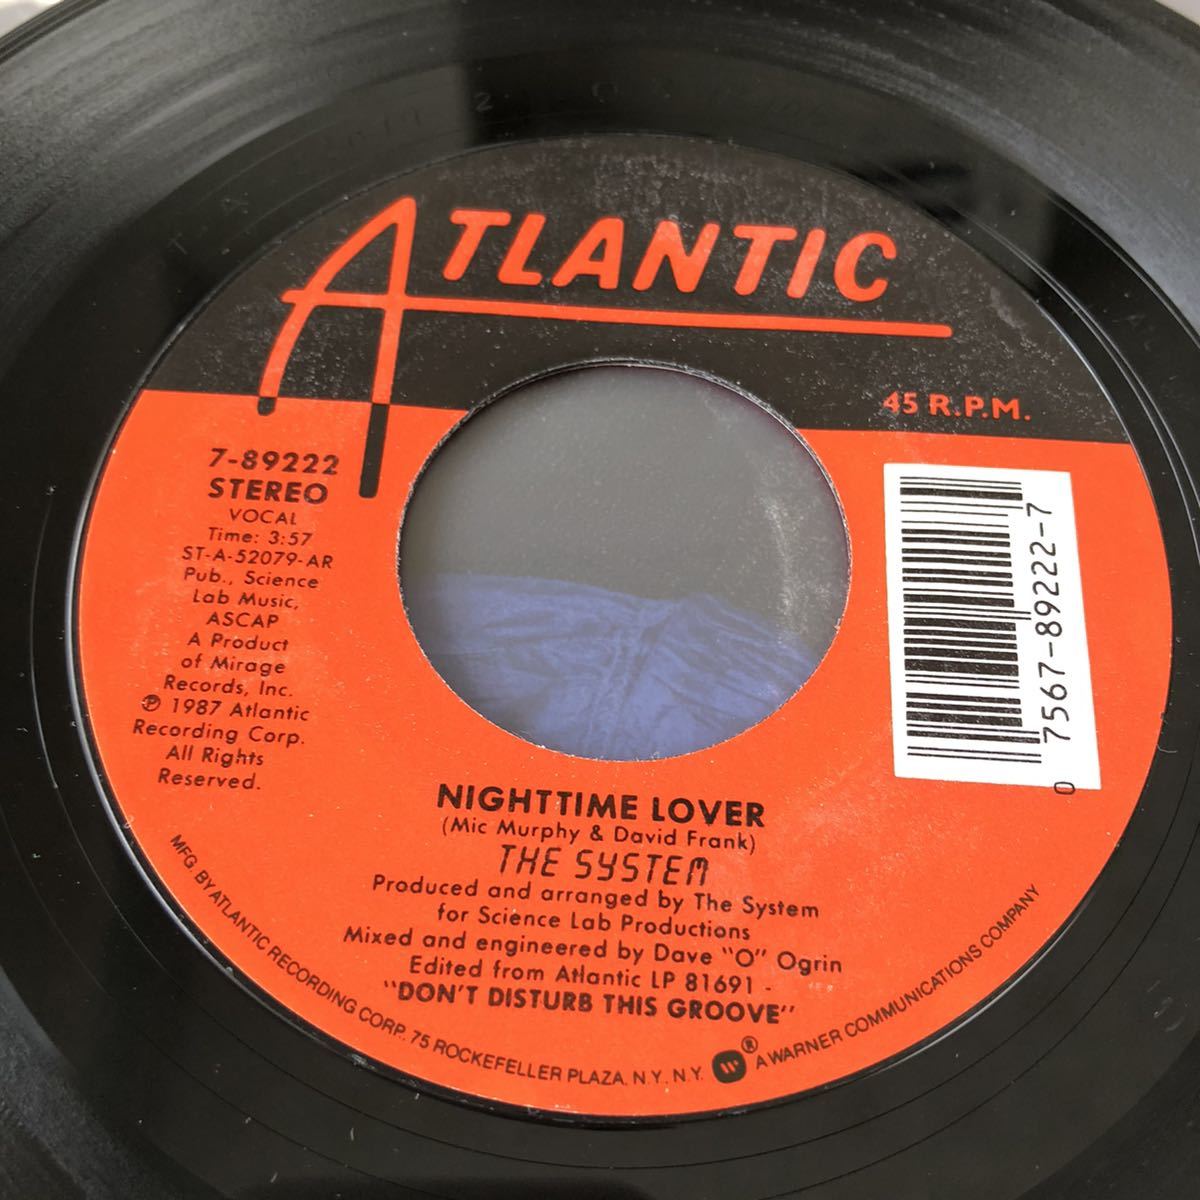 【US盤米盤7inch】THE SYSTER NIGHTTIME LOVER SAVE ME / EP レコード / 7-89222 / 洋楽ソウルR&B /_画像6